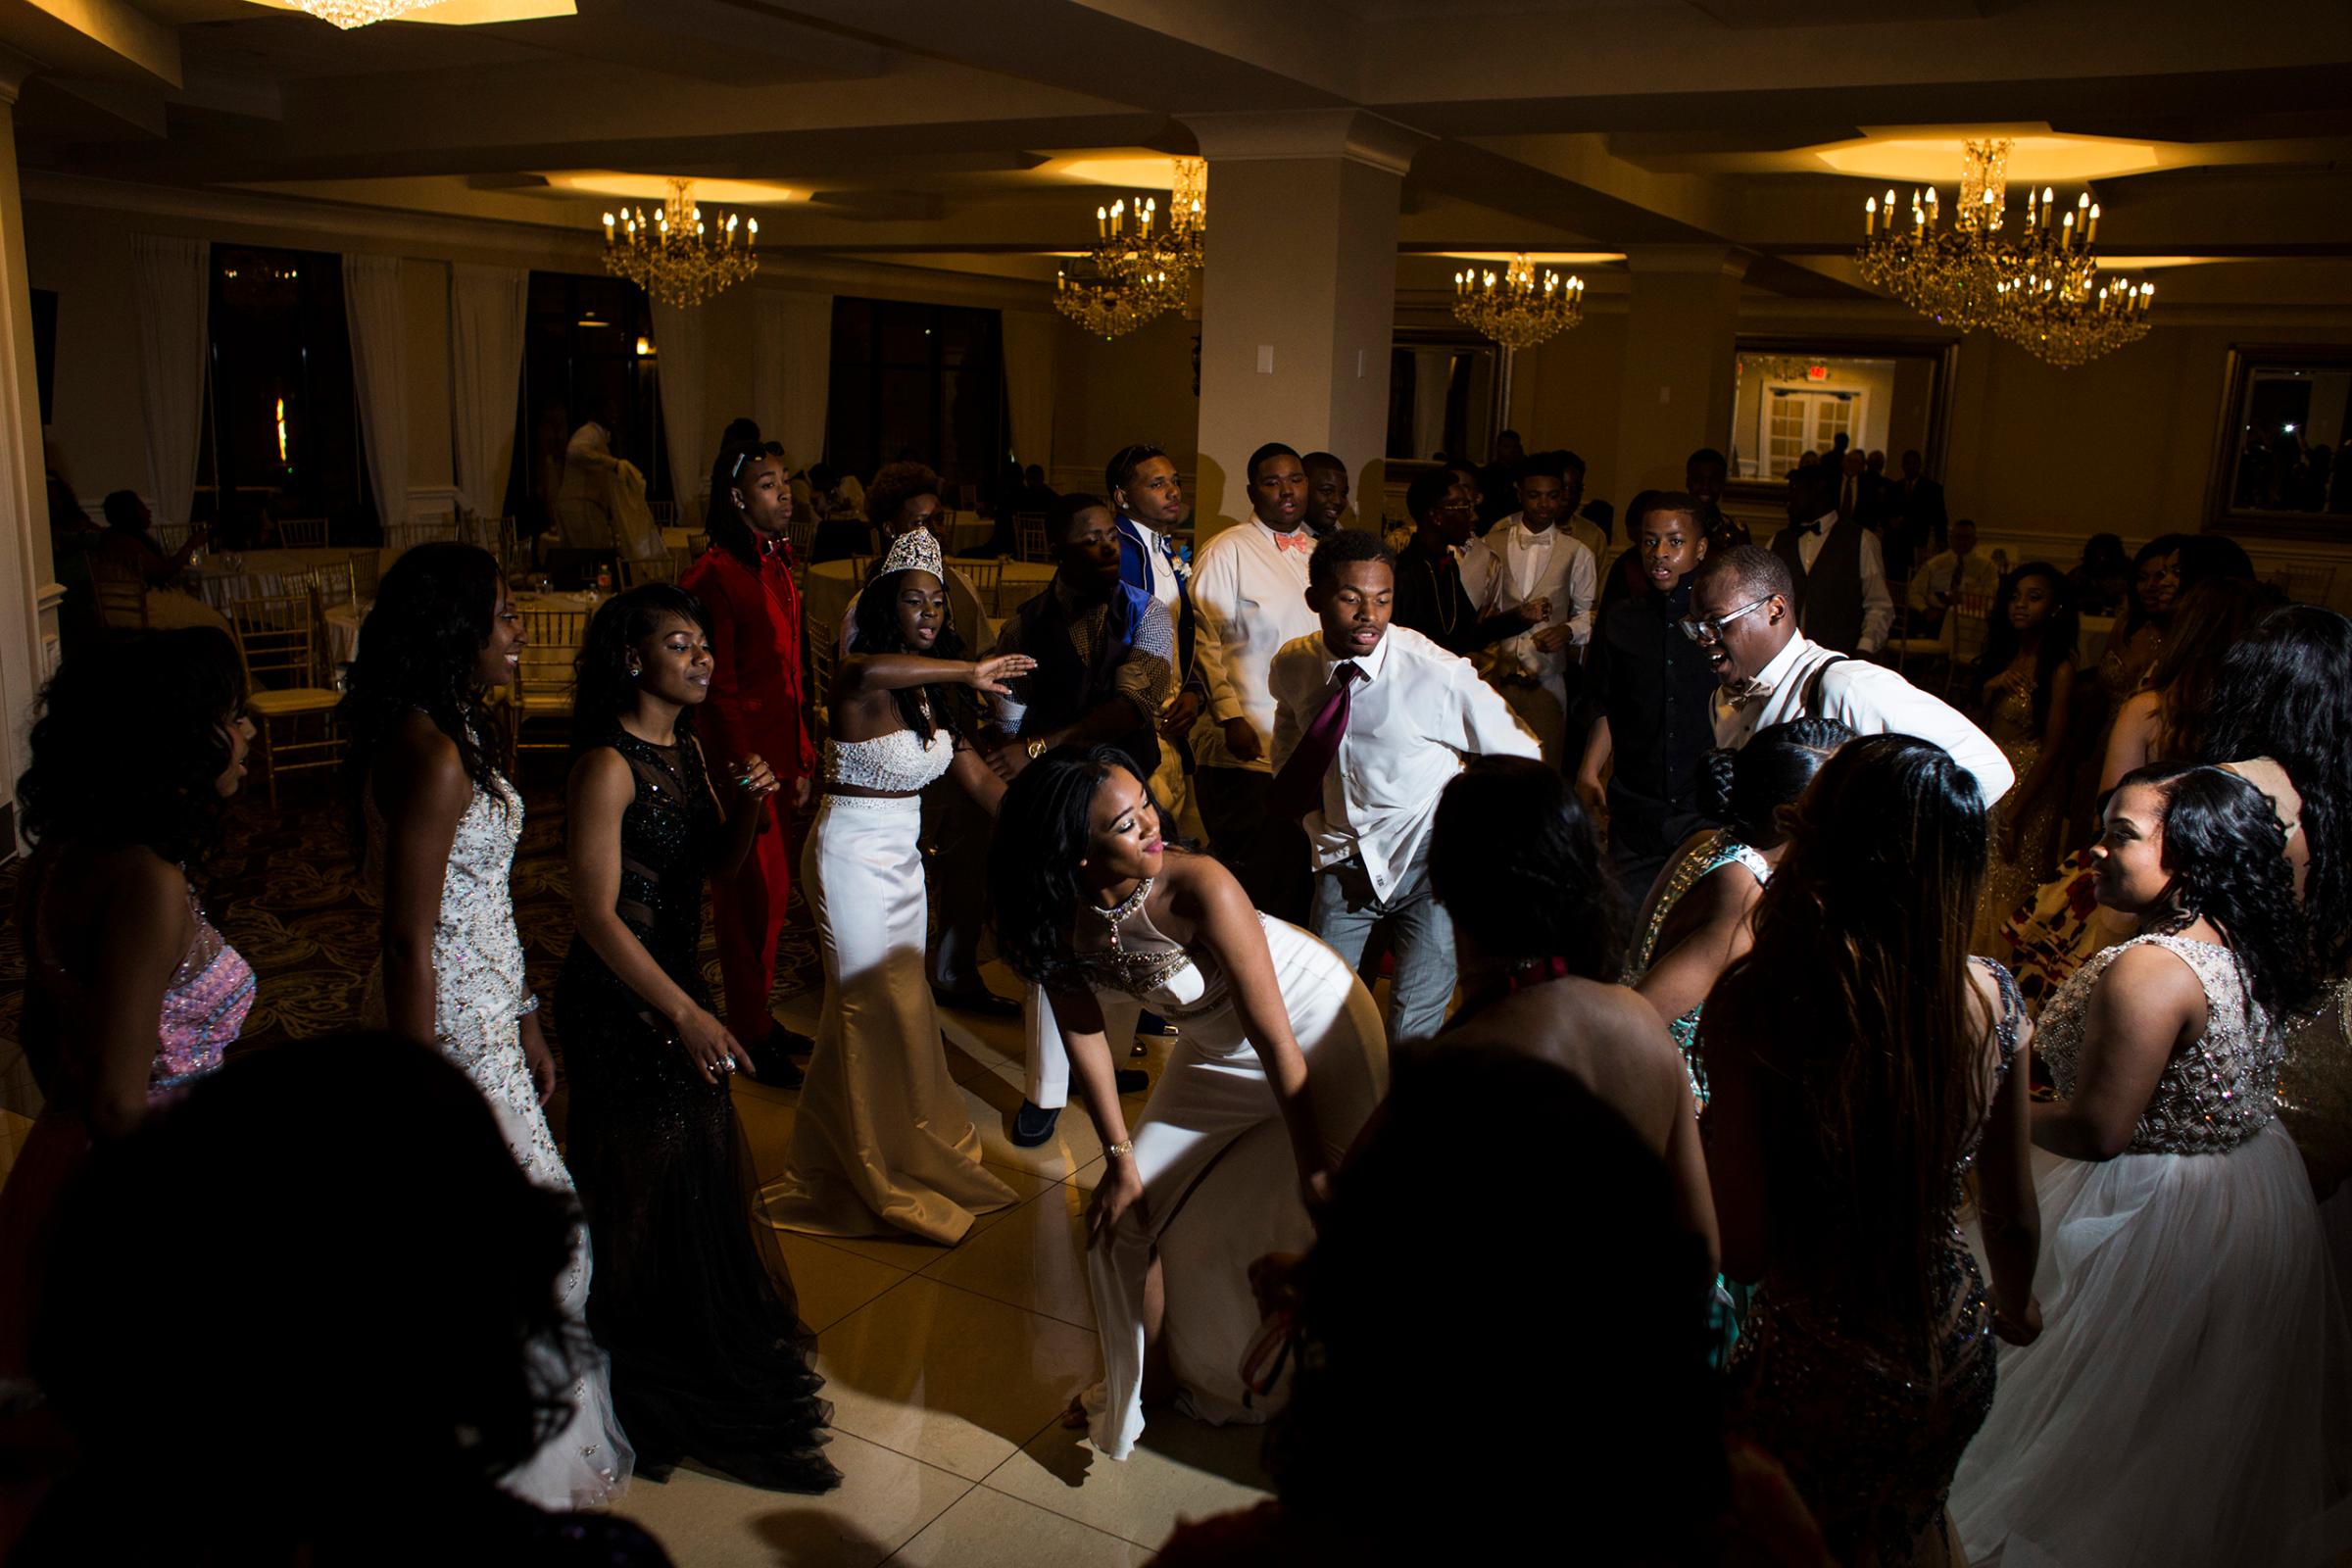 Students dance during a soul train line during prom at the Signature Chop House in Flushing, Mich., May 20, 2016.